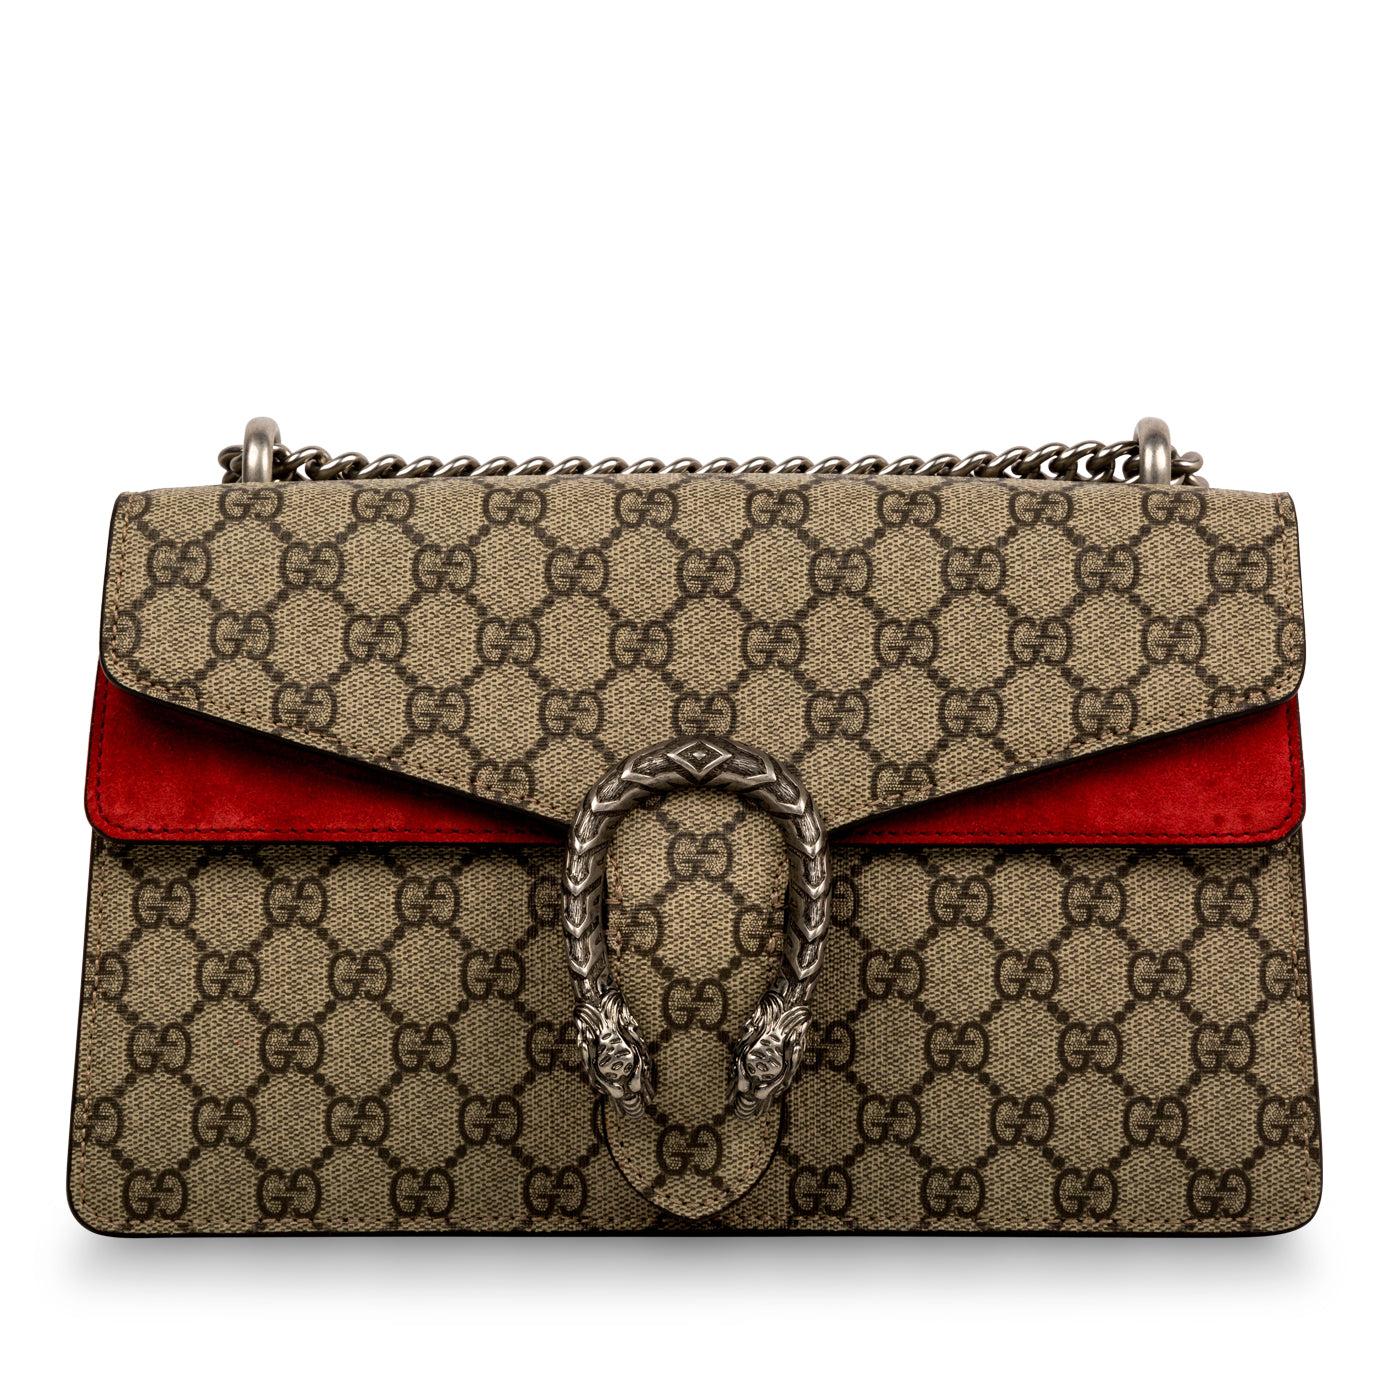 Gucci Dionysus GG Supreme Suede Mini Red in Suede with Silver-tone